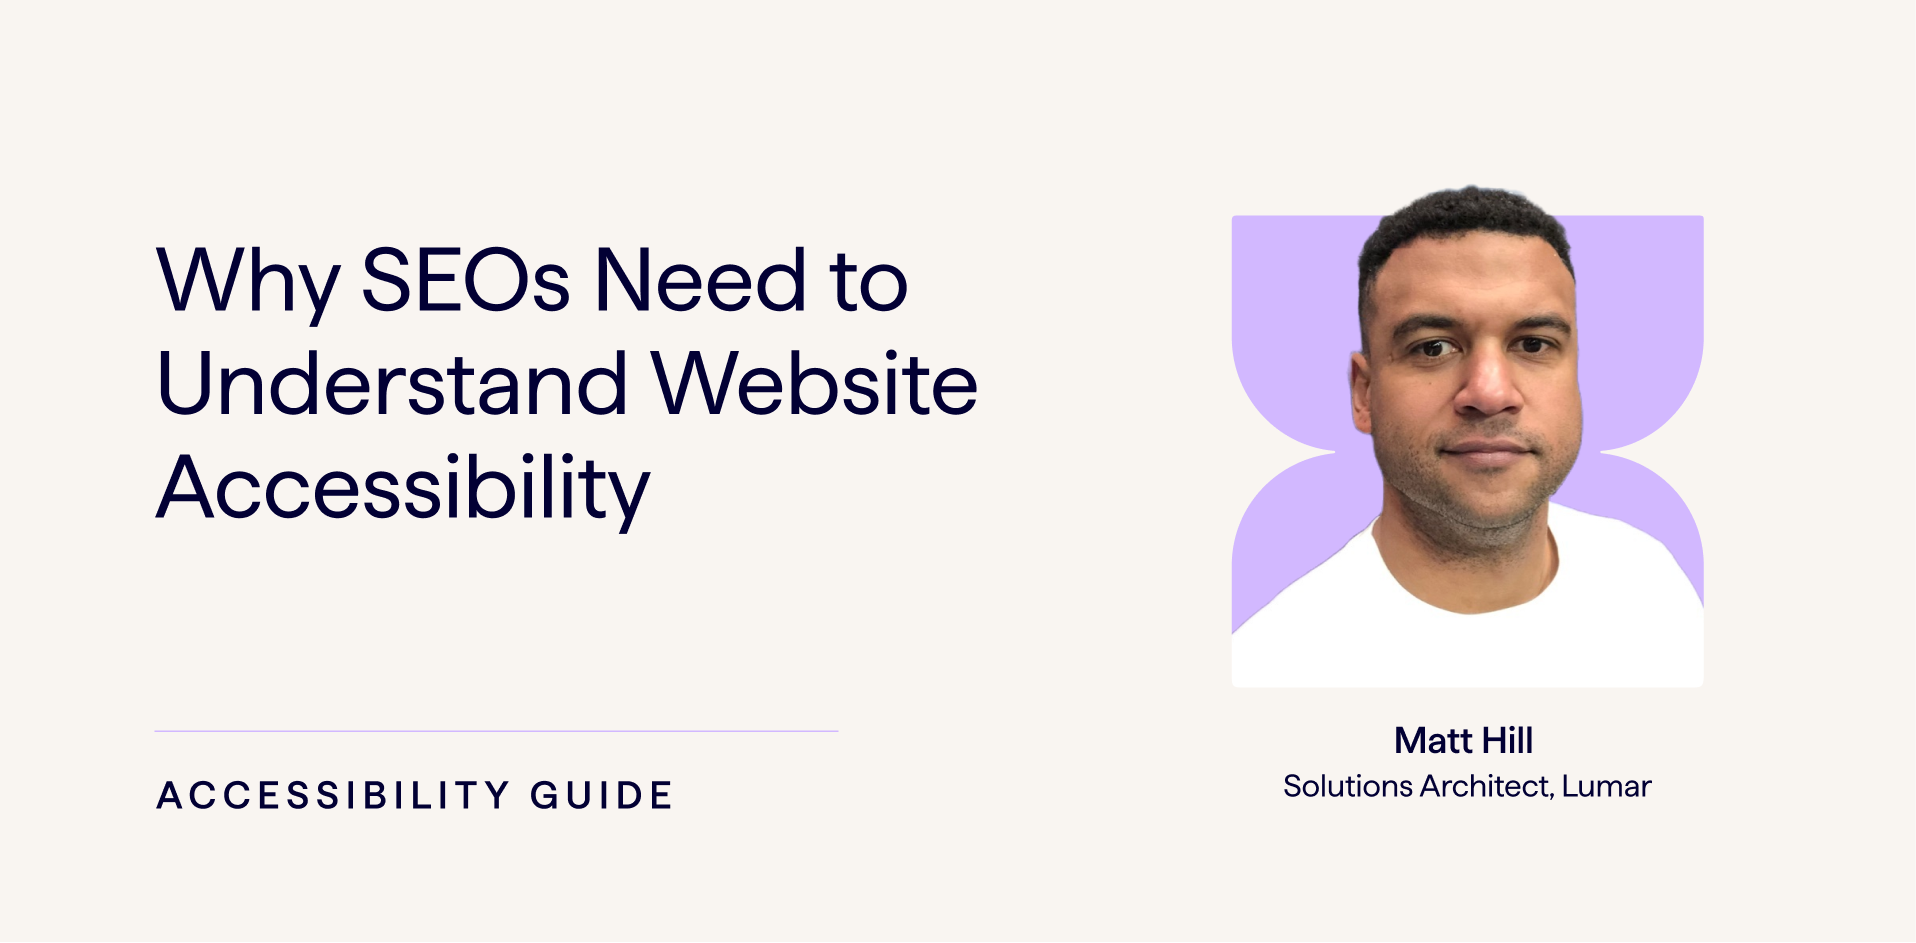 Why SEOs Need to Understand Website Accessibility